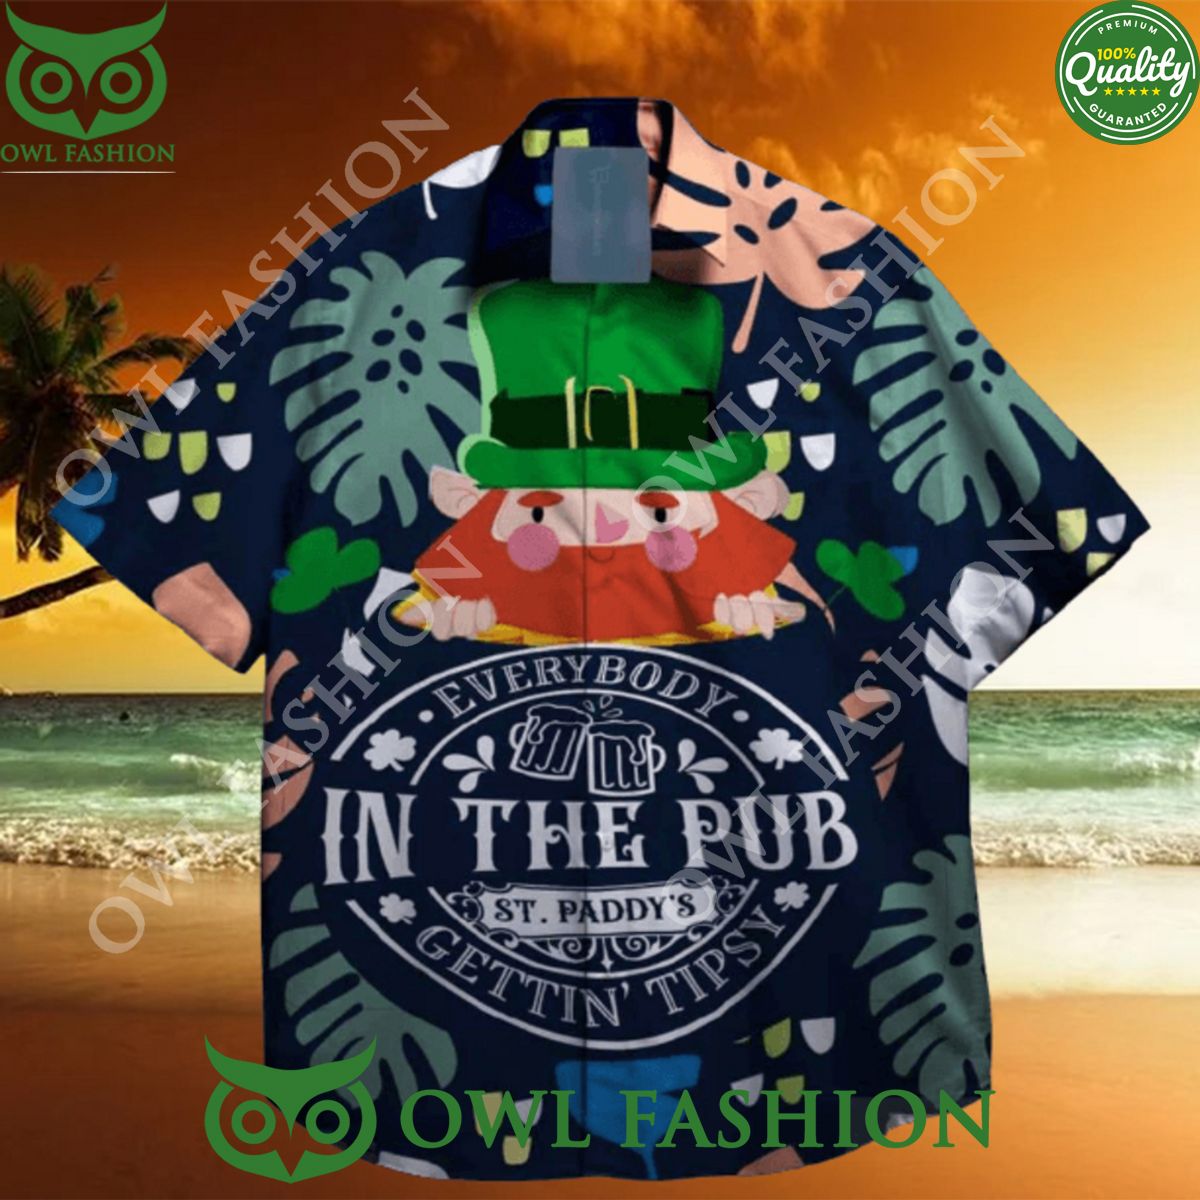 everybody in the beer pub gettins tipsy st patrick day hawaiian shirt 1 qscp2.jpg